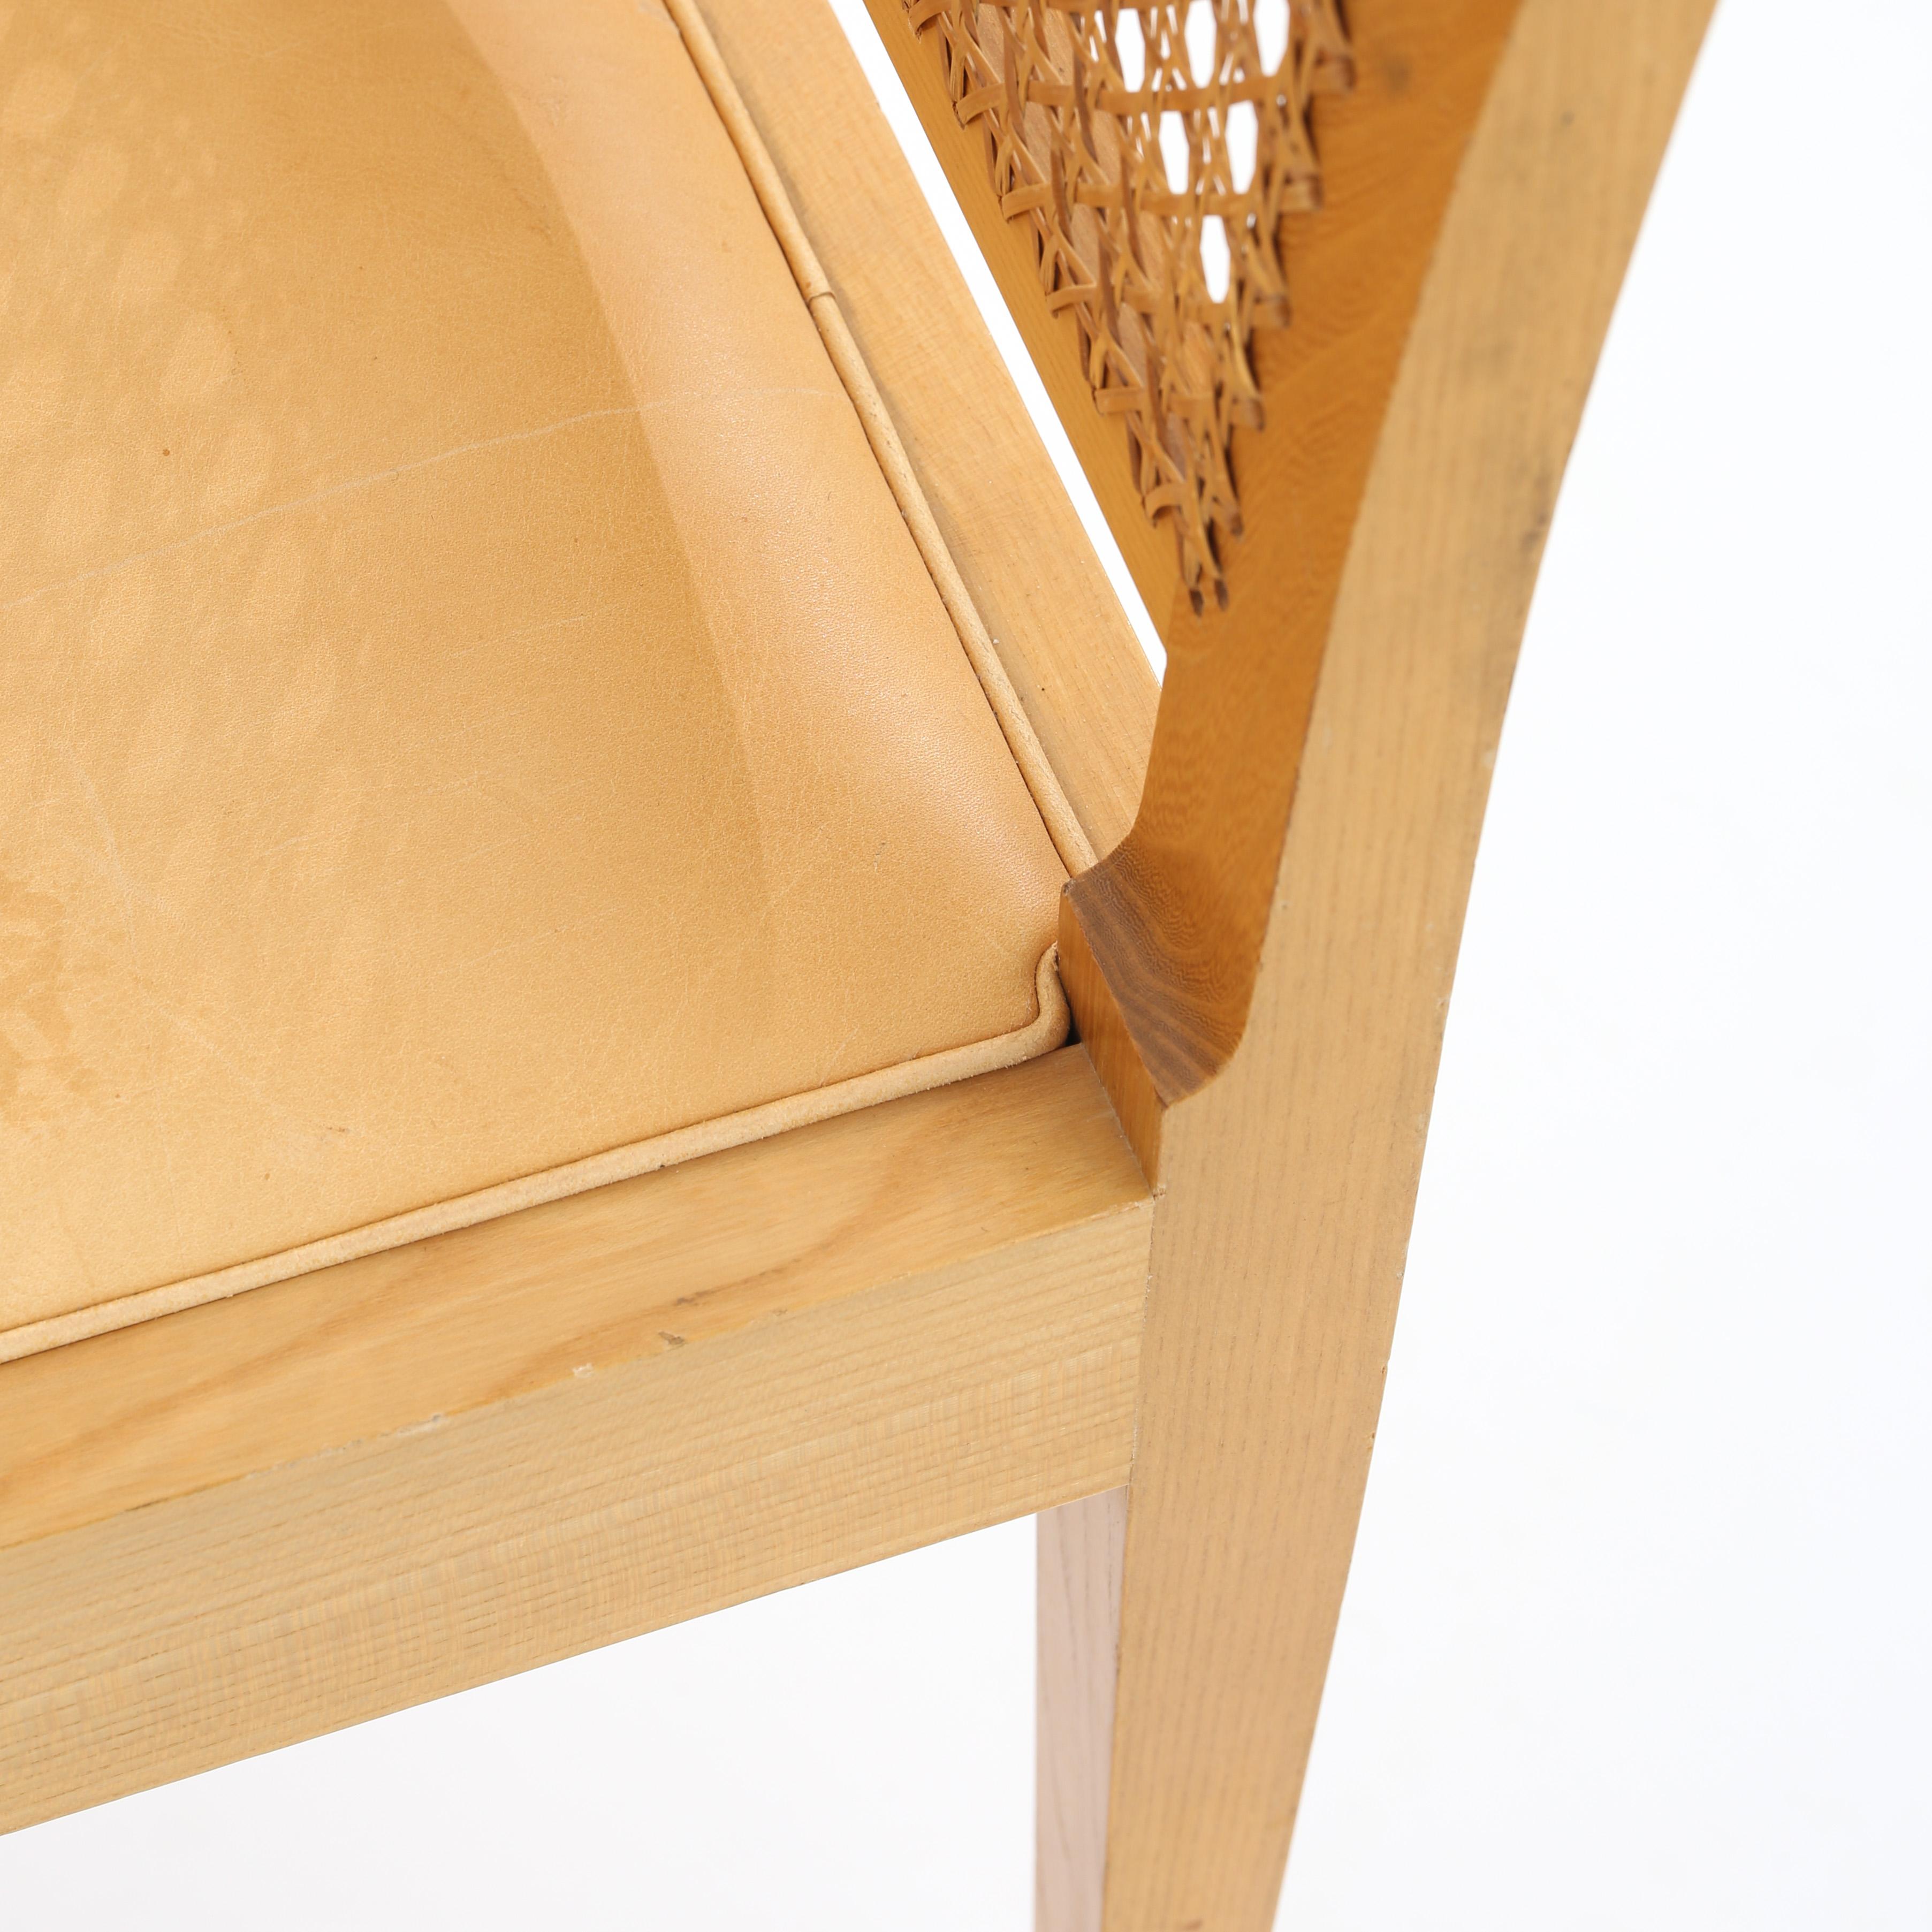 Model 9662 - 'Faaborg' chair in elm and seat in natural leather. Kaare Klint. Maker Rud. Rasmussen.